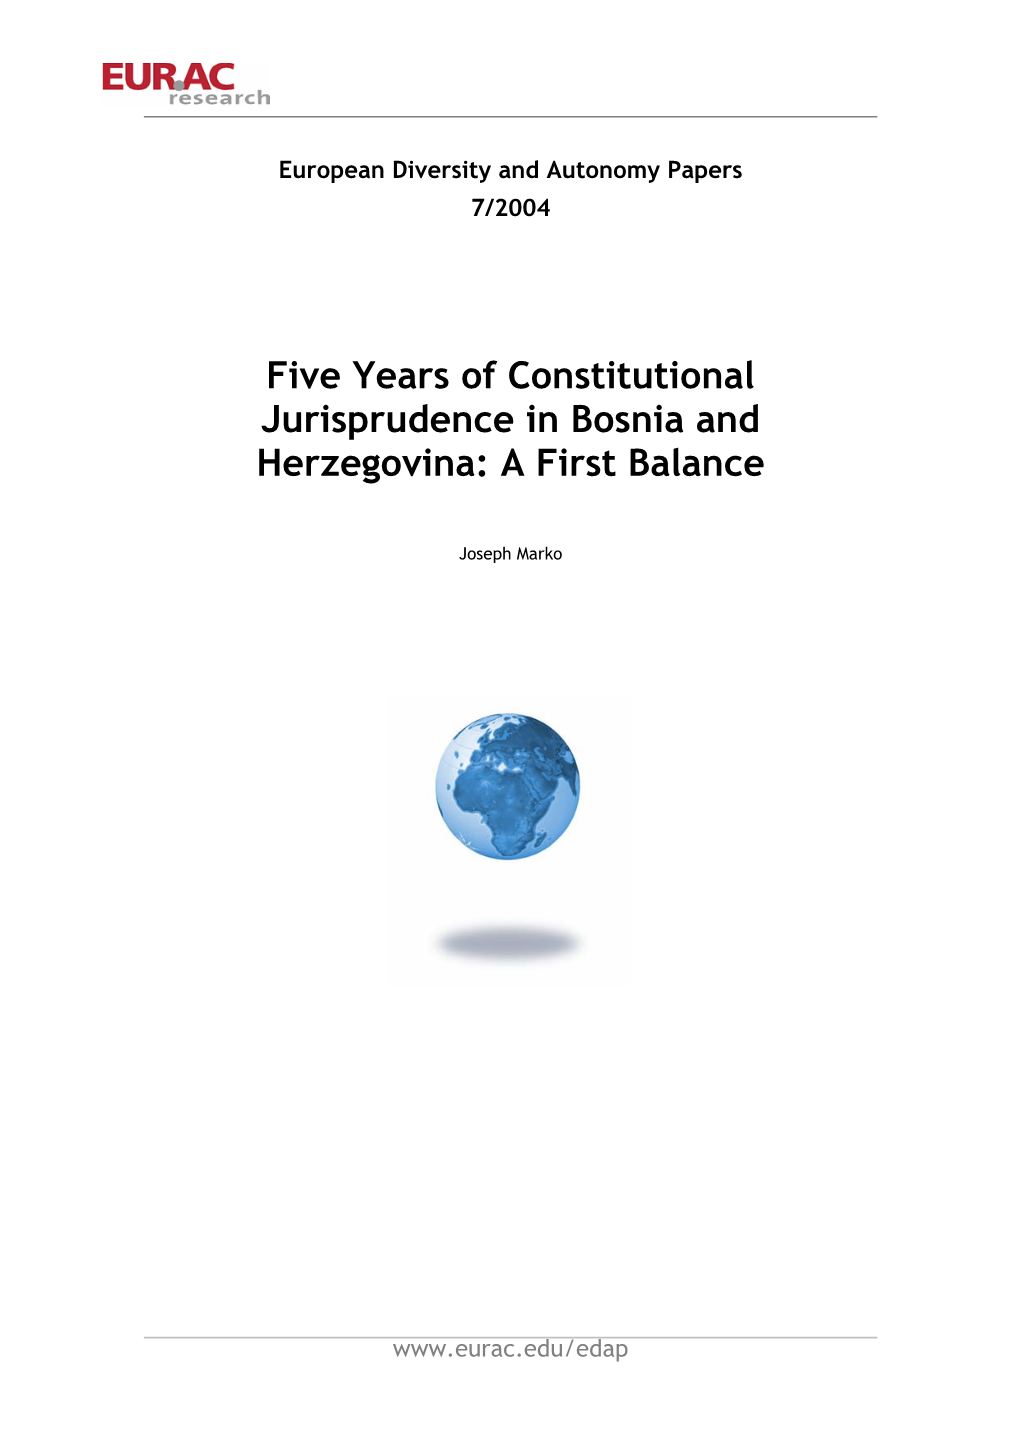 Five Years of Constitutional Jurisprudence in Bosnia and Herzegovina: a First Balance